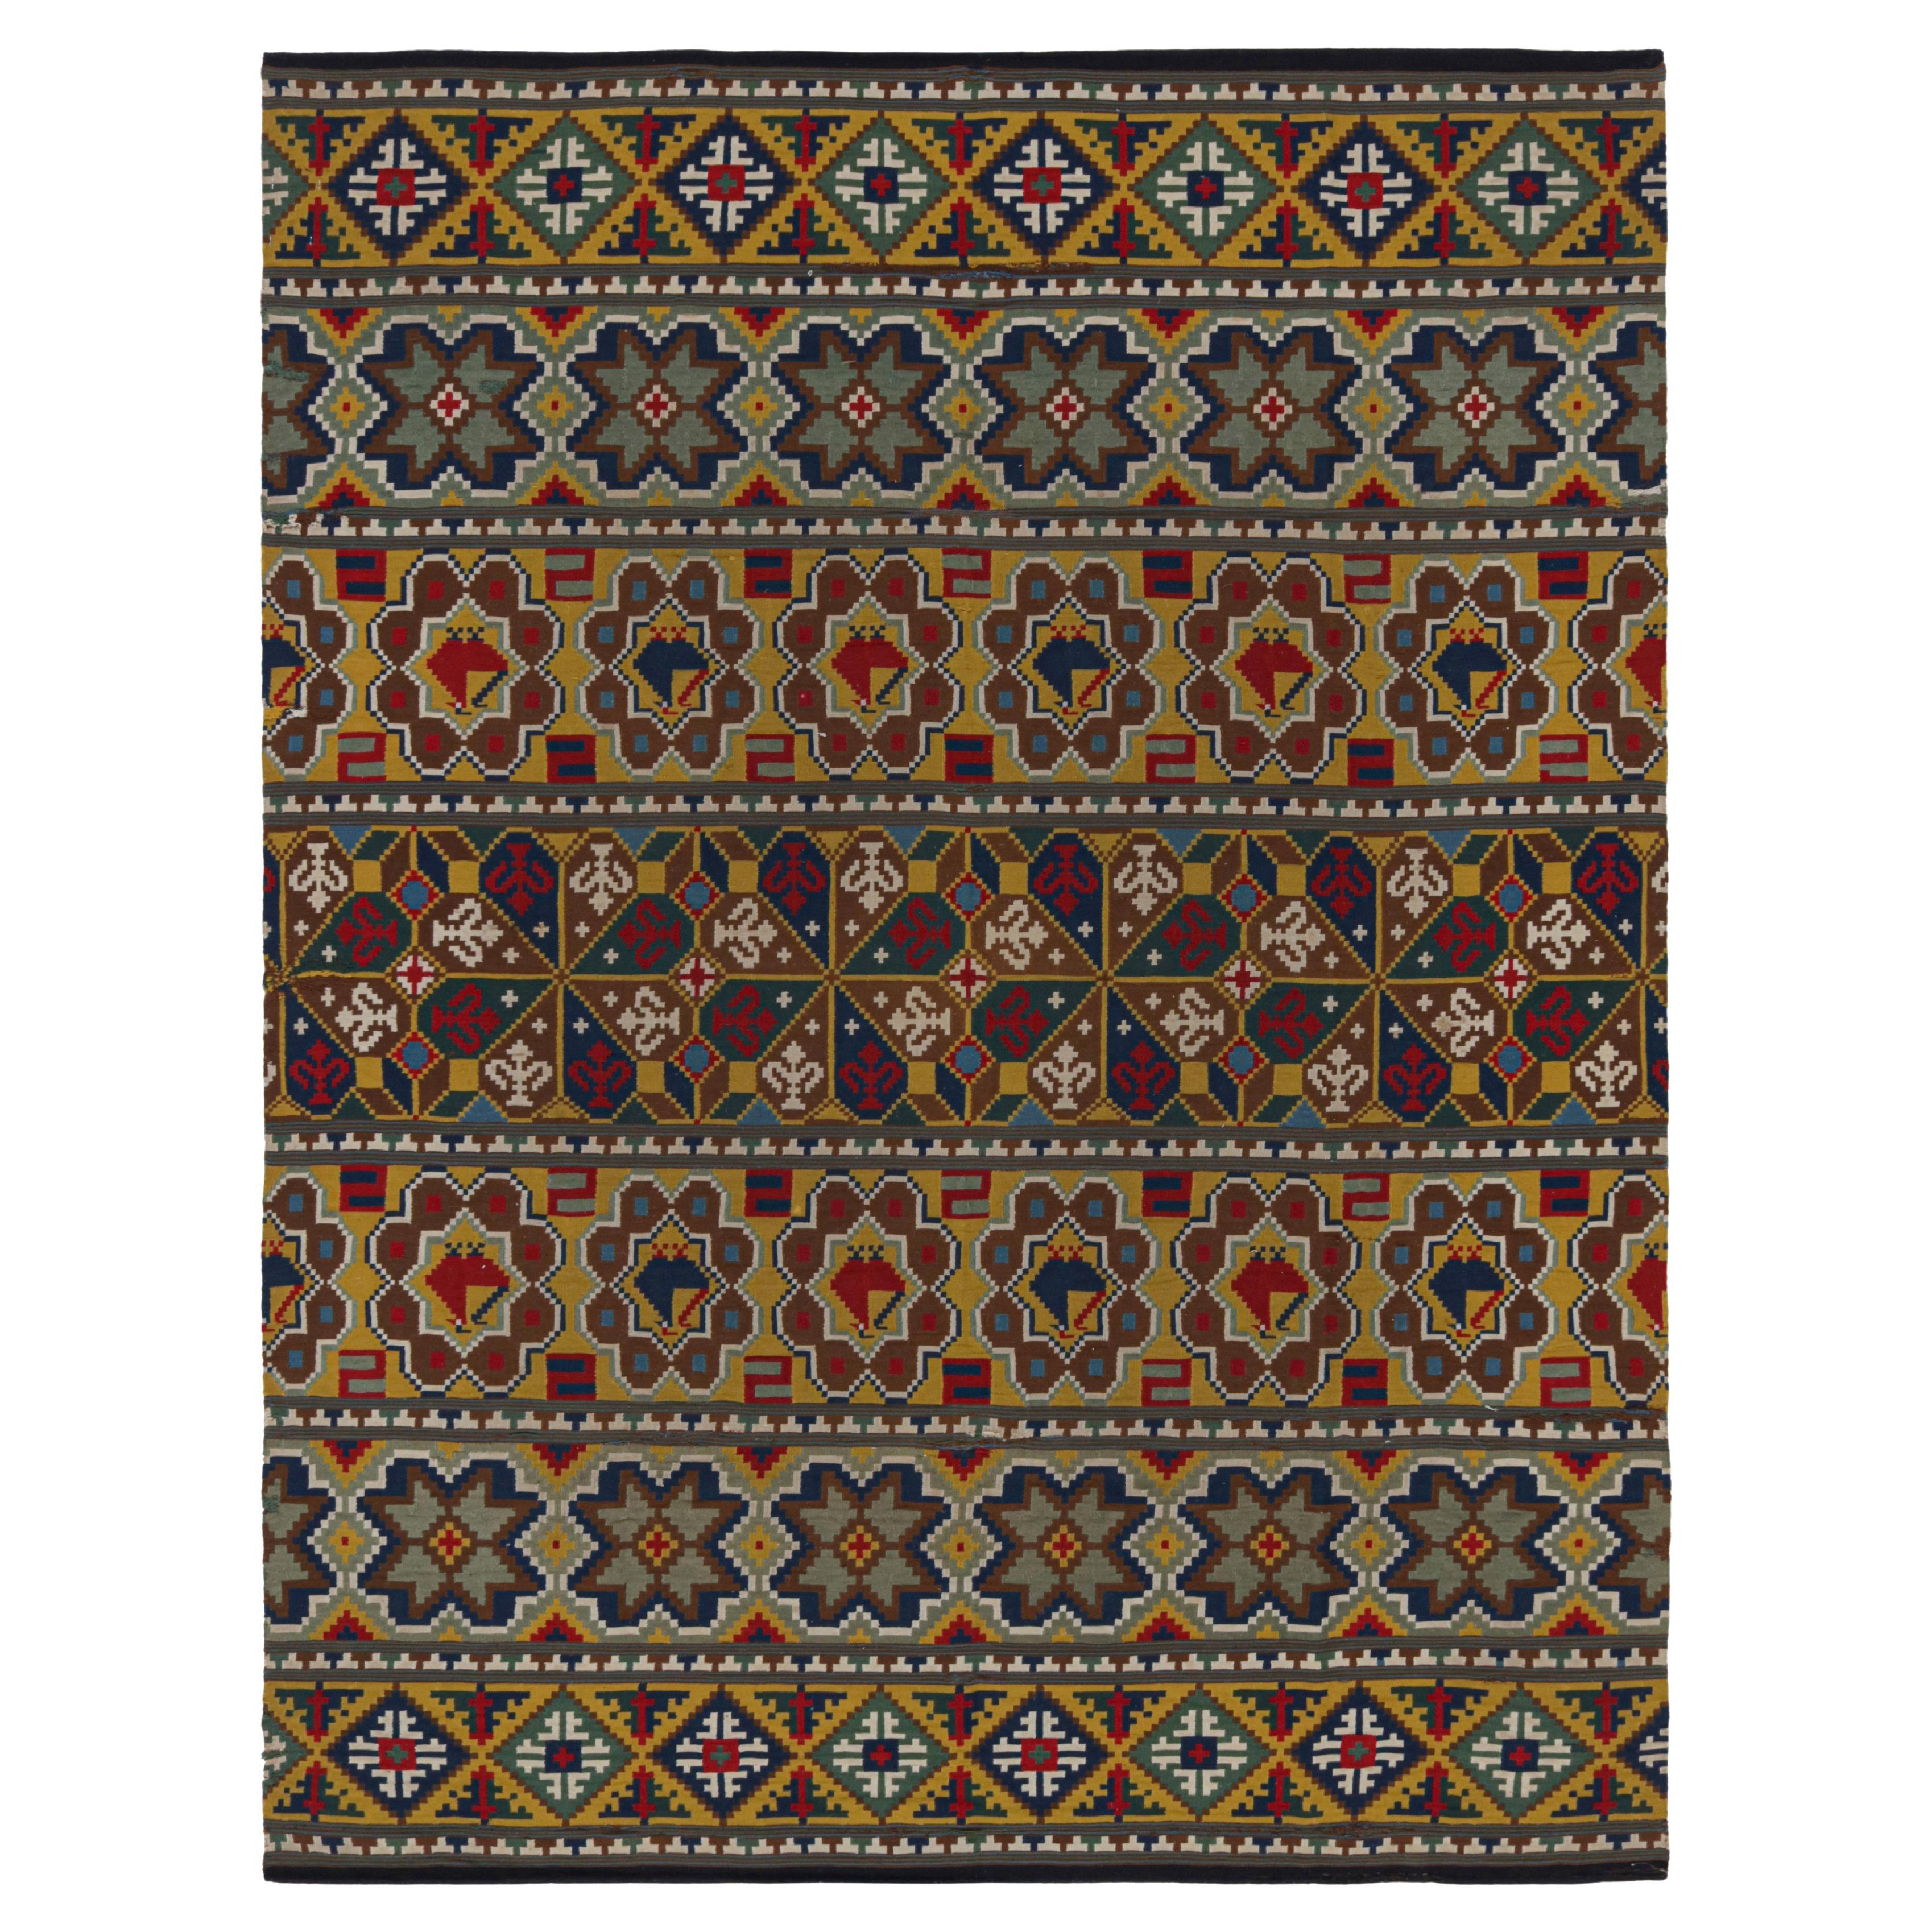 Antique Swedish Textile with Polychromatic Patterns & Pictorial from Rug & Kilim